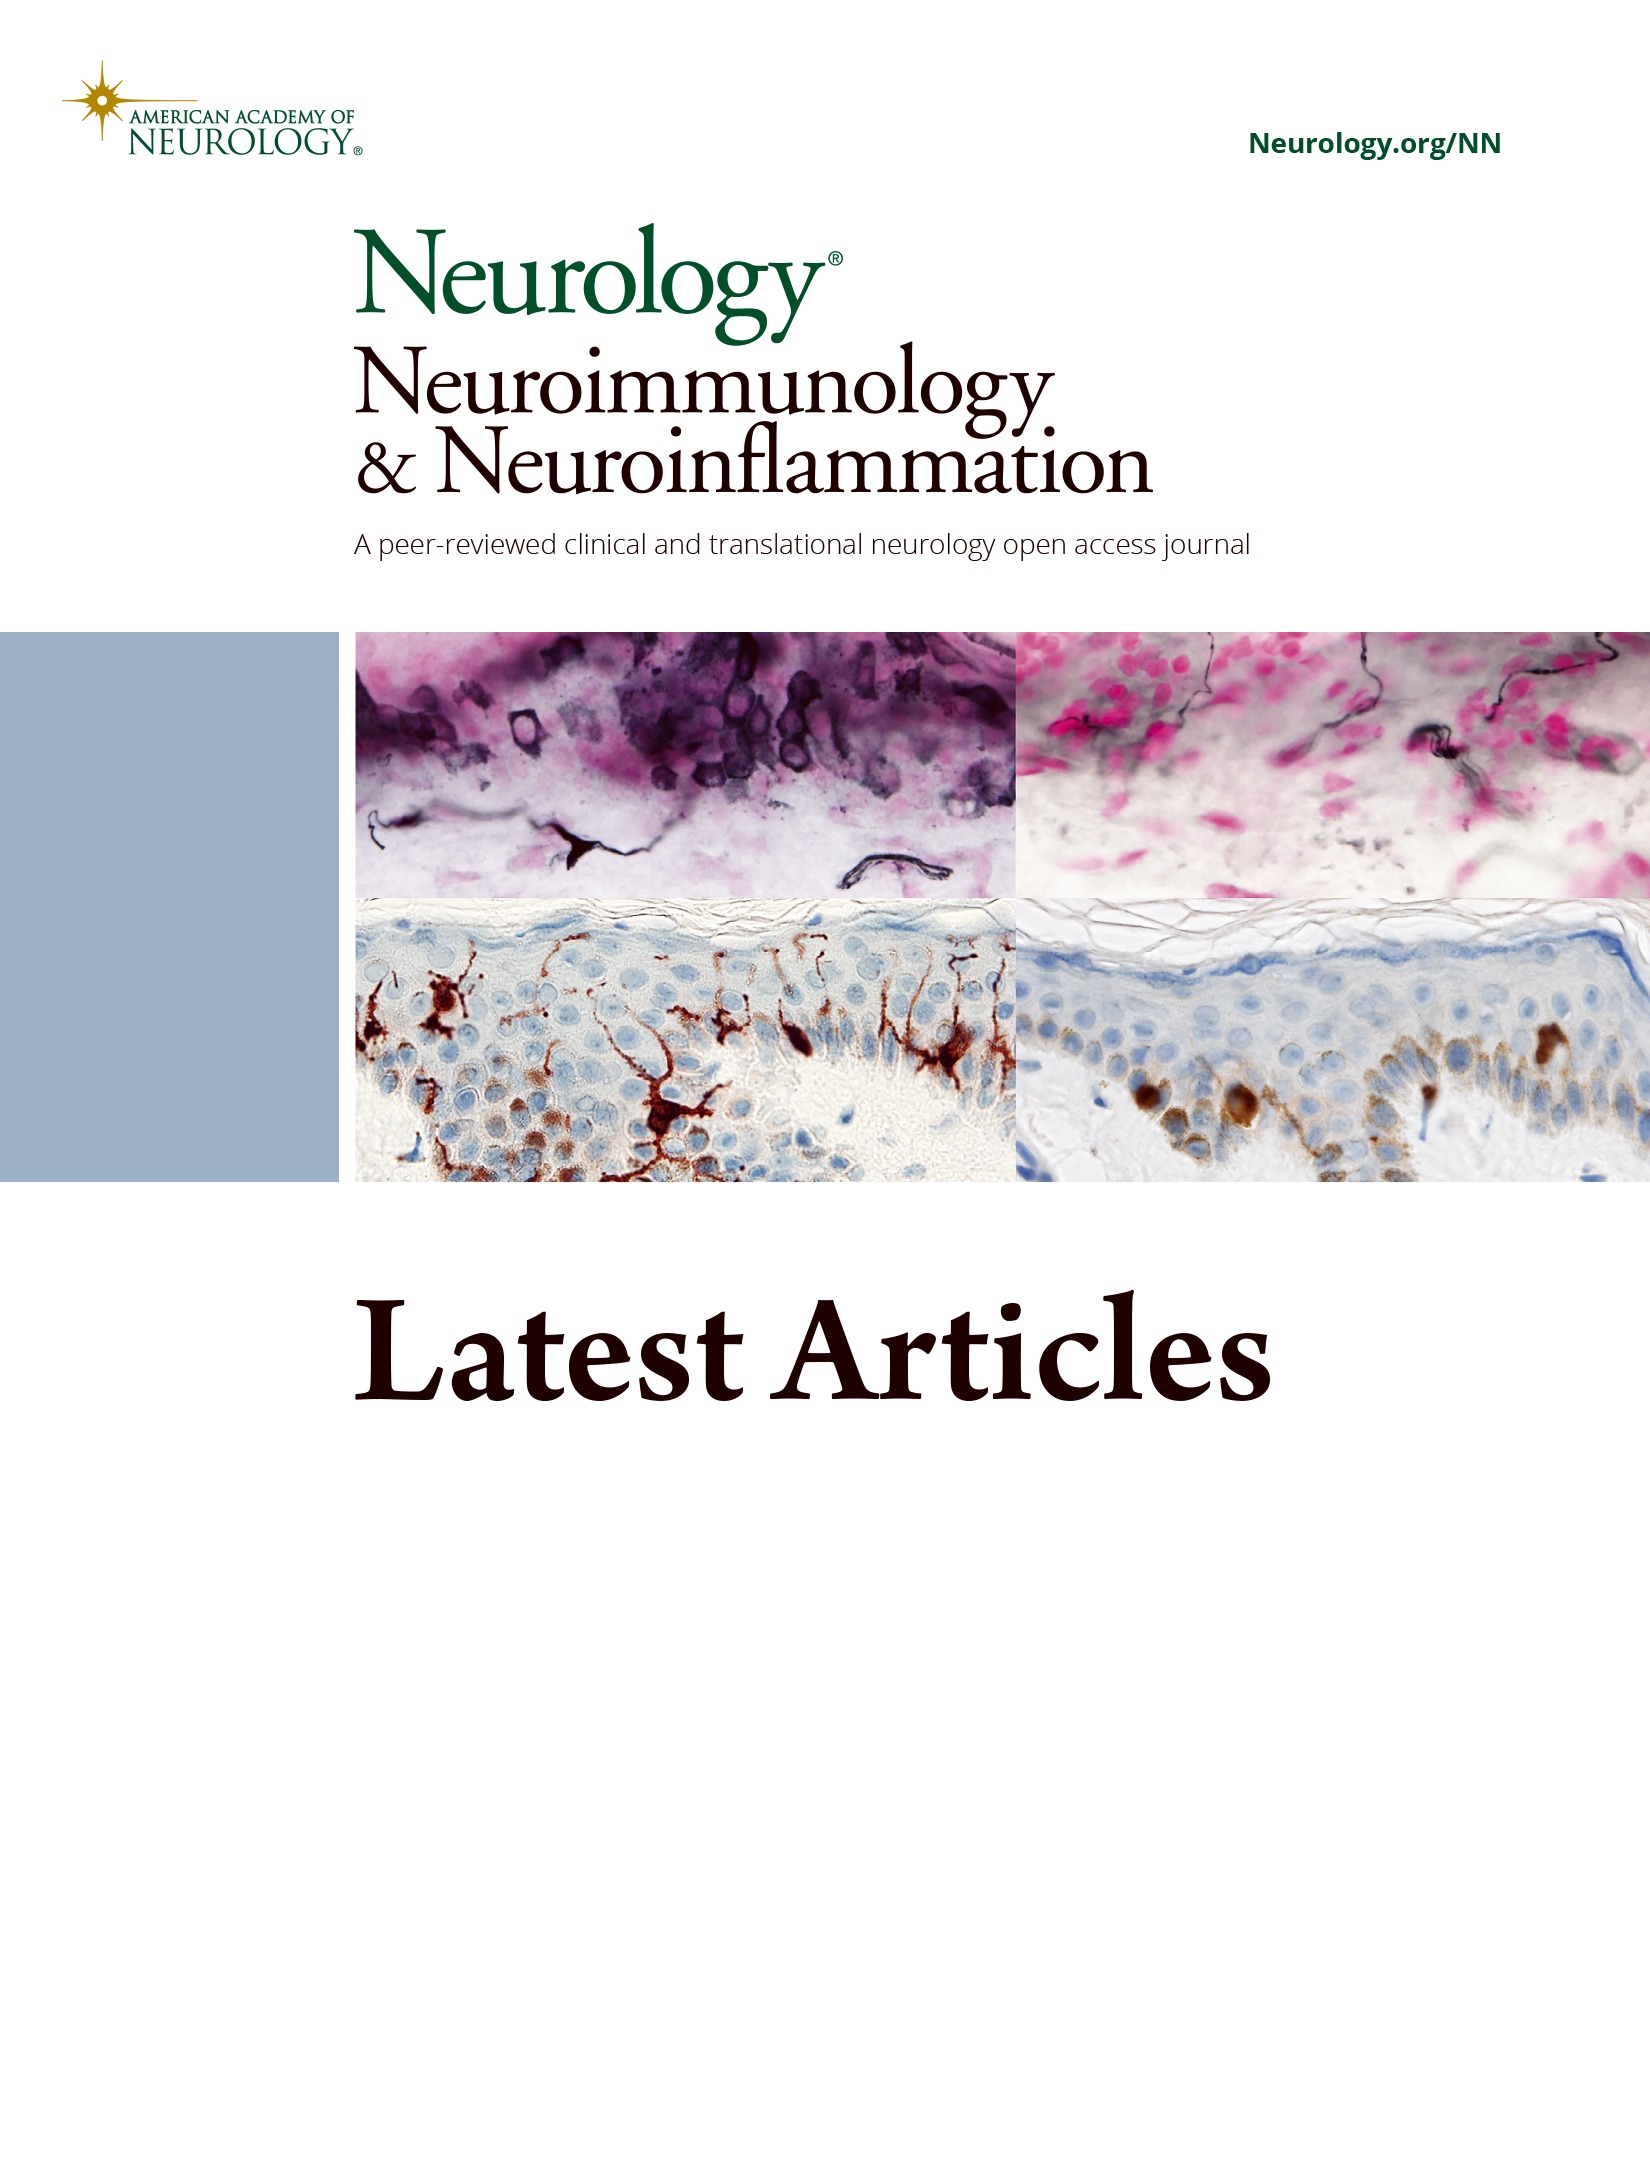 Immune Response and Safety of SARS-CoV-2 mRNA-1273 Vaccine in Patients With Myasthenia Gravis